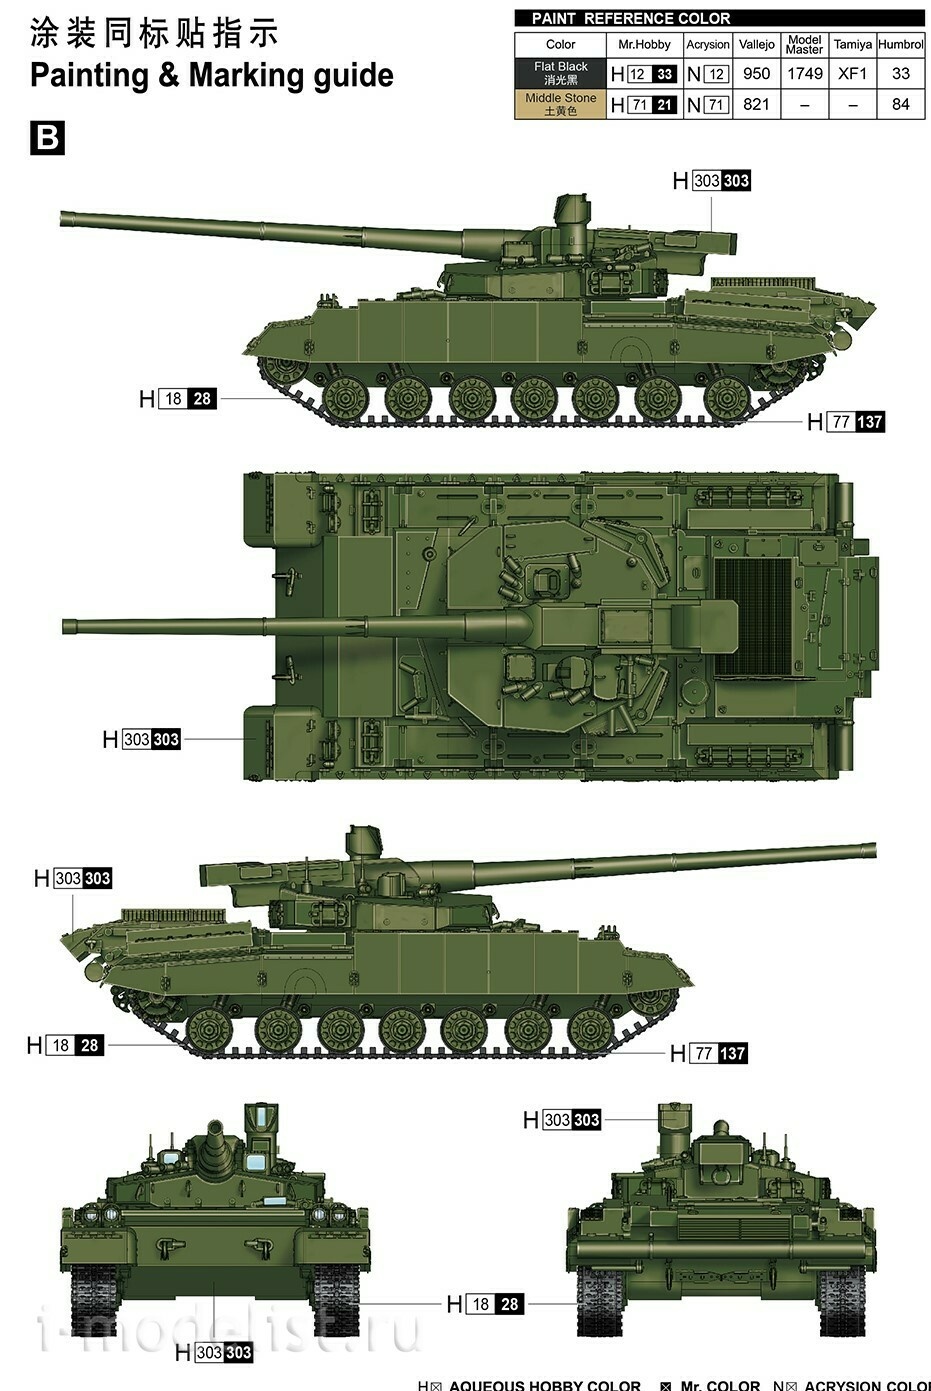 09607 Trumpeter 1/35 Tank Object 490A